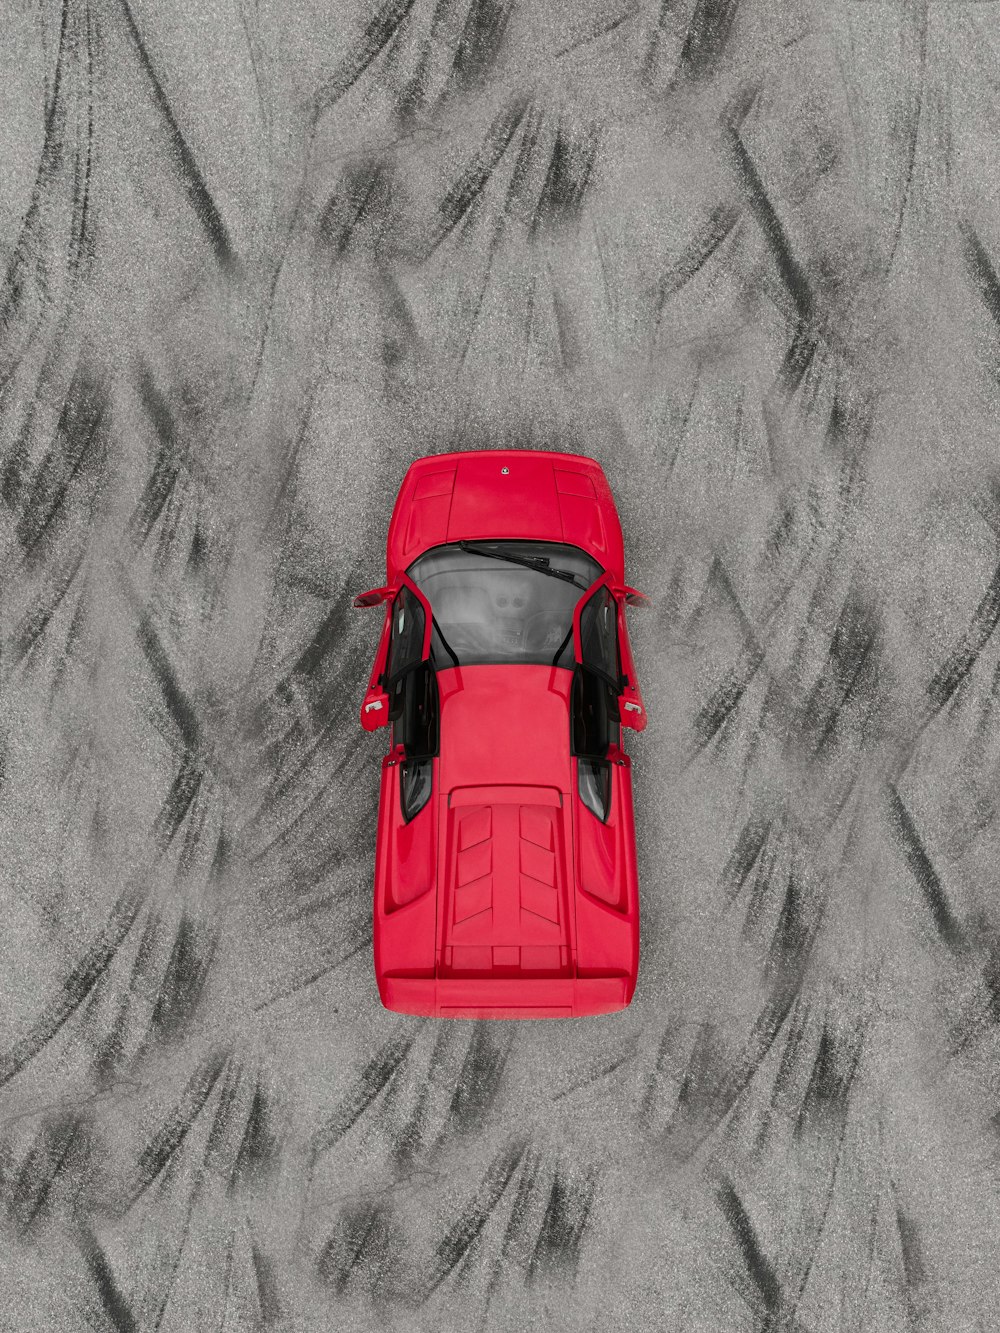 red car on gray scale